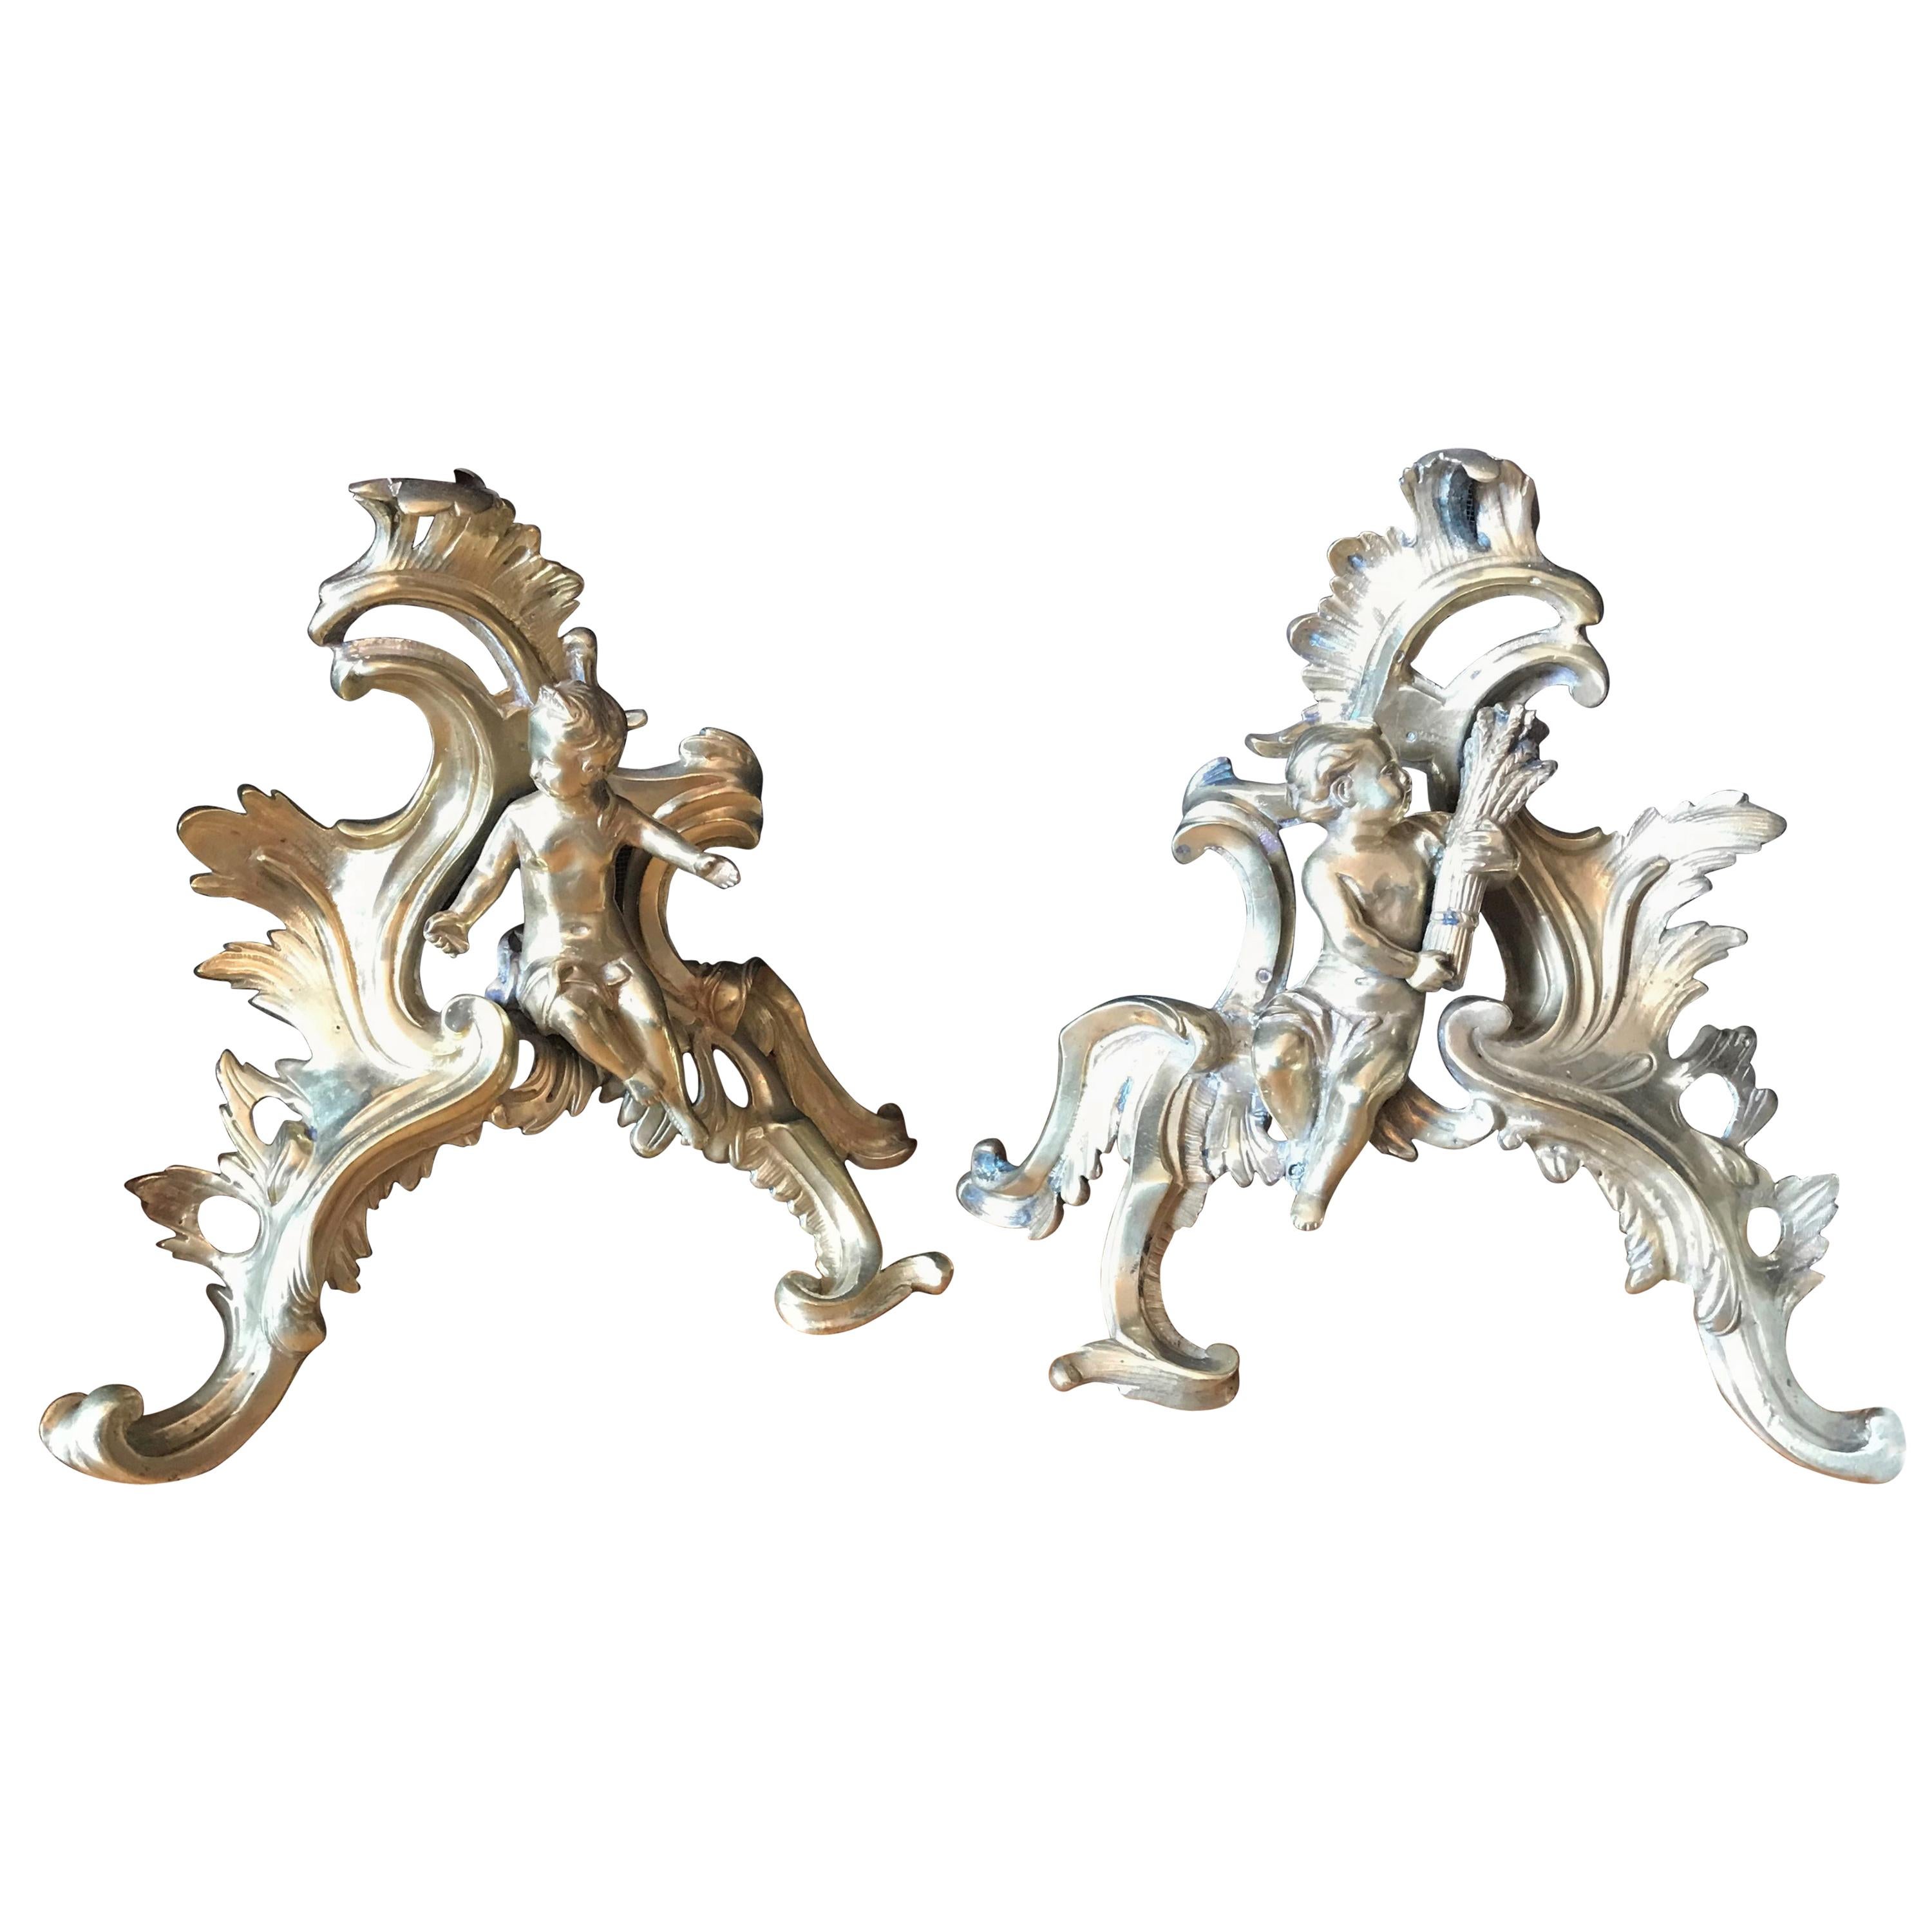 Small Pair of French Ormolu Fireplace Chenets, Cherub Motif, circa 1890-1900 For Sale